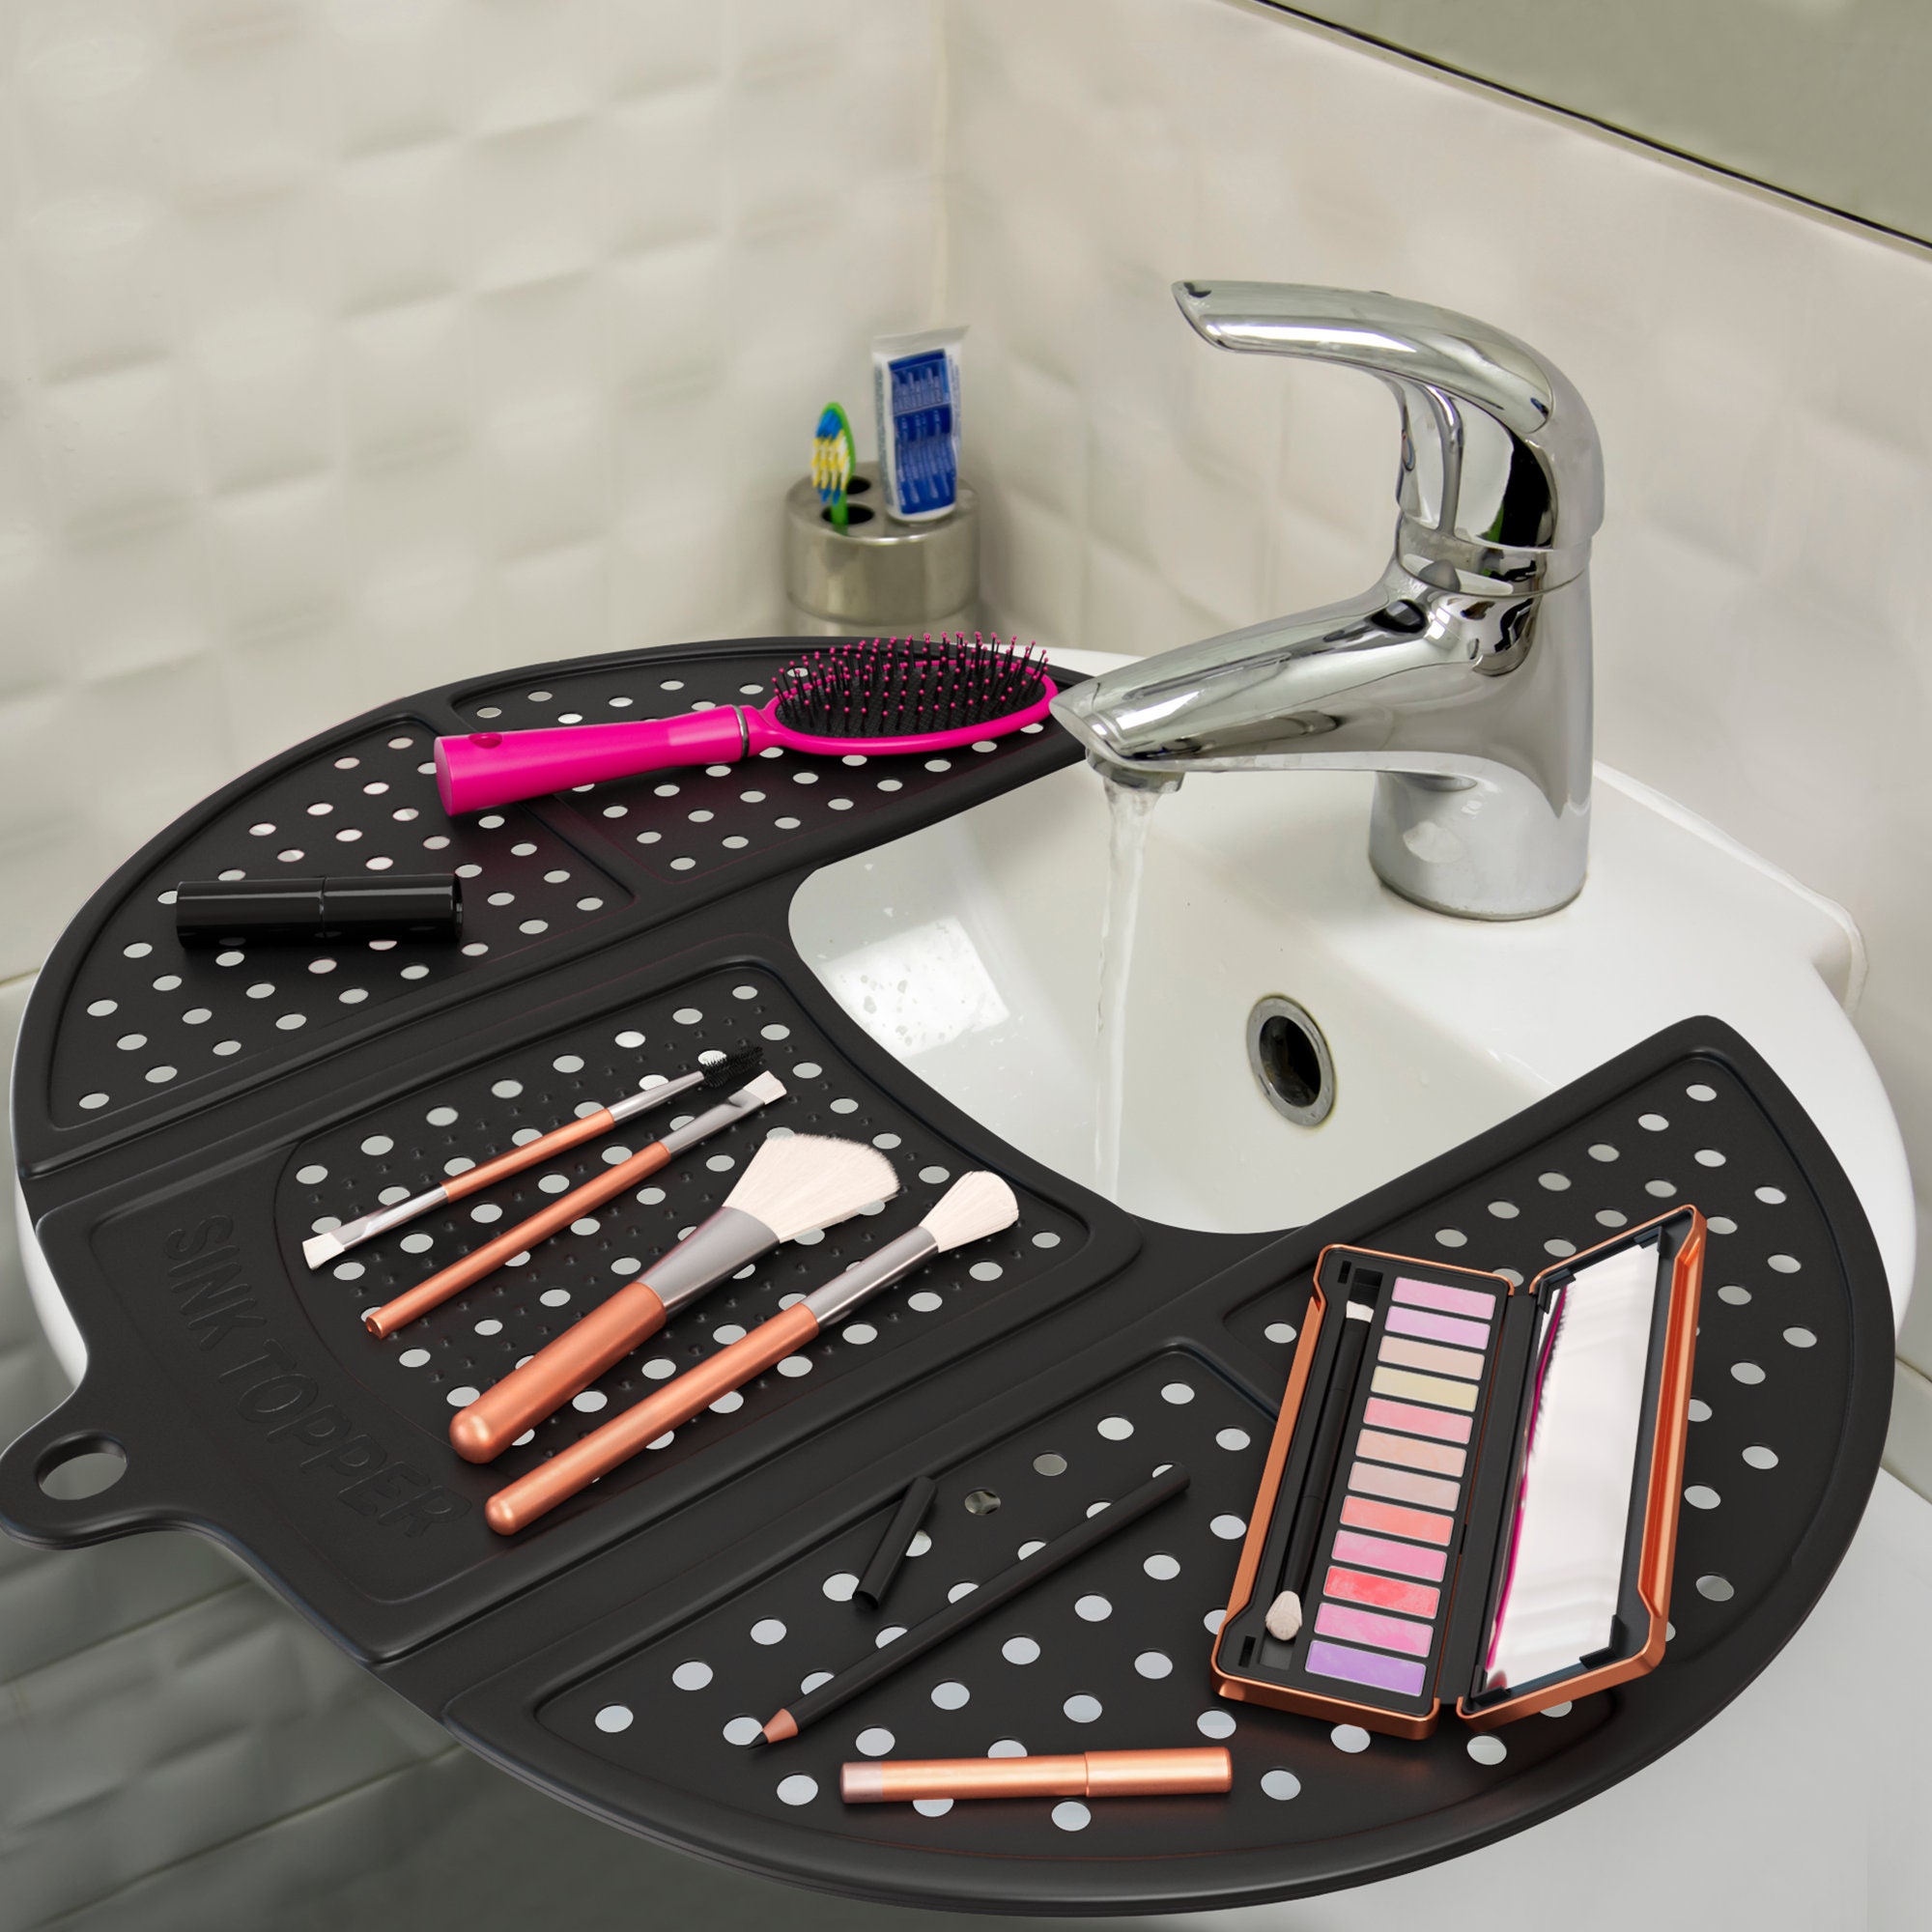 Bathroom Sink Cover for Counter Space - Heat Resistant Silicone Mat &  Makeup Mat for Your Beauty Routine - Small Bathroom Space Creation -  Bathroom